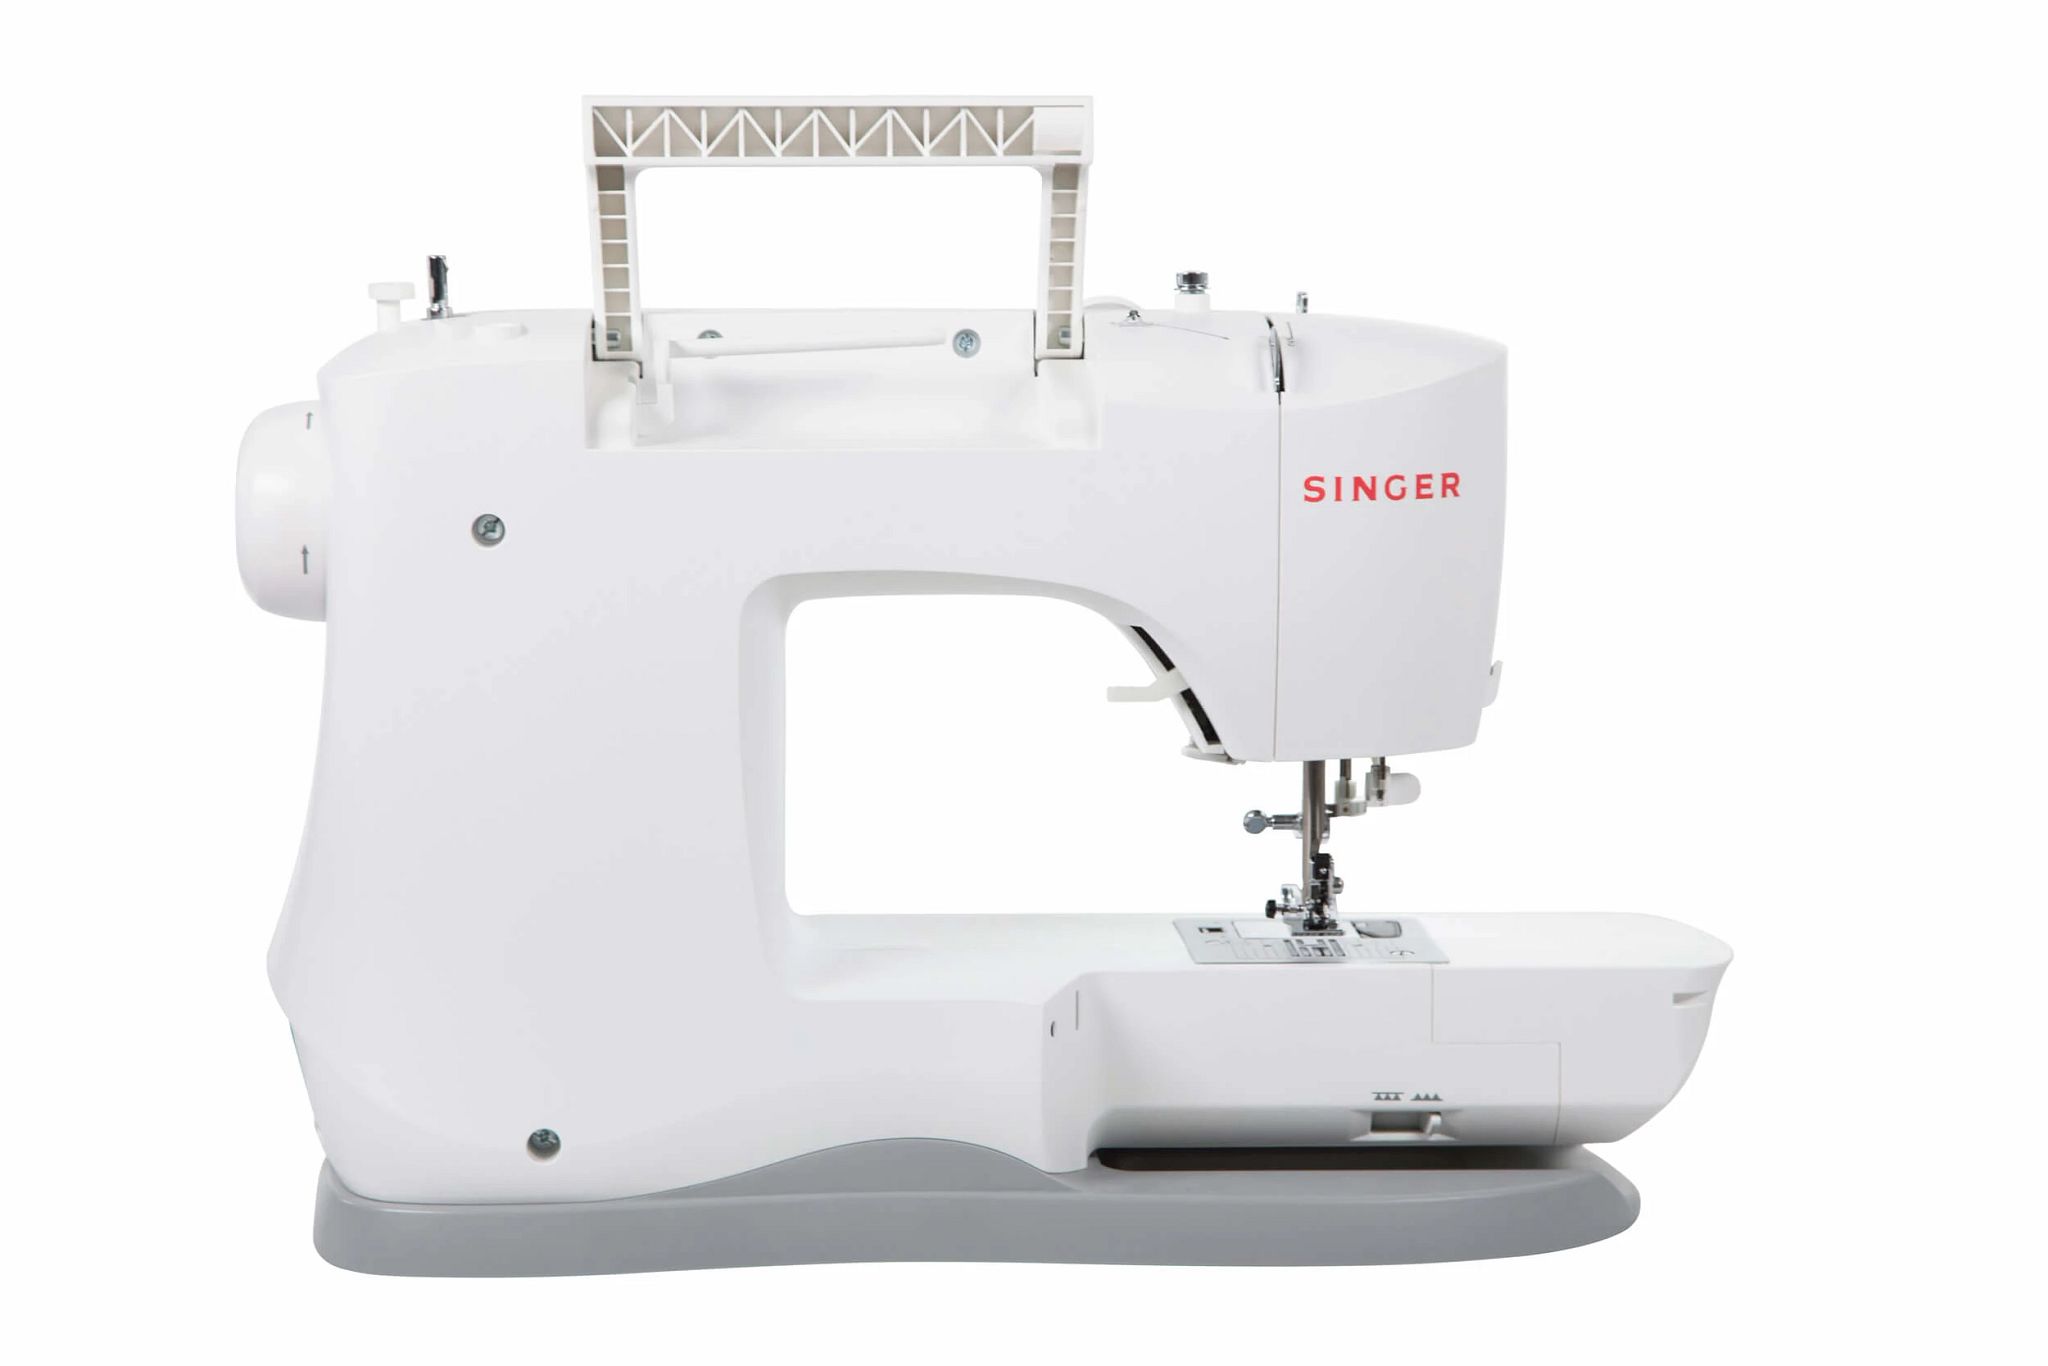 Confidence™ 7640 Sewing Machine